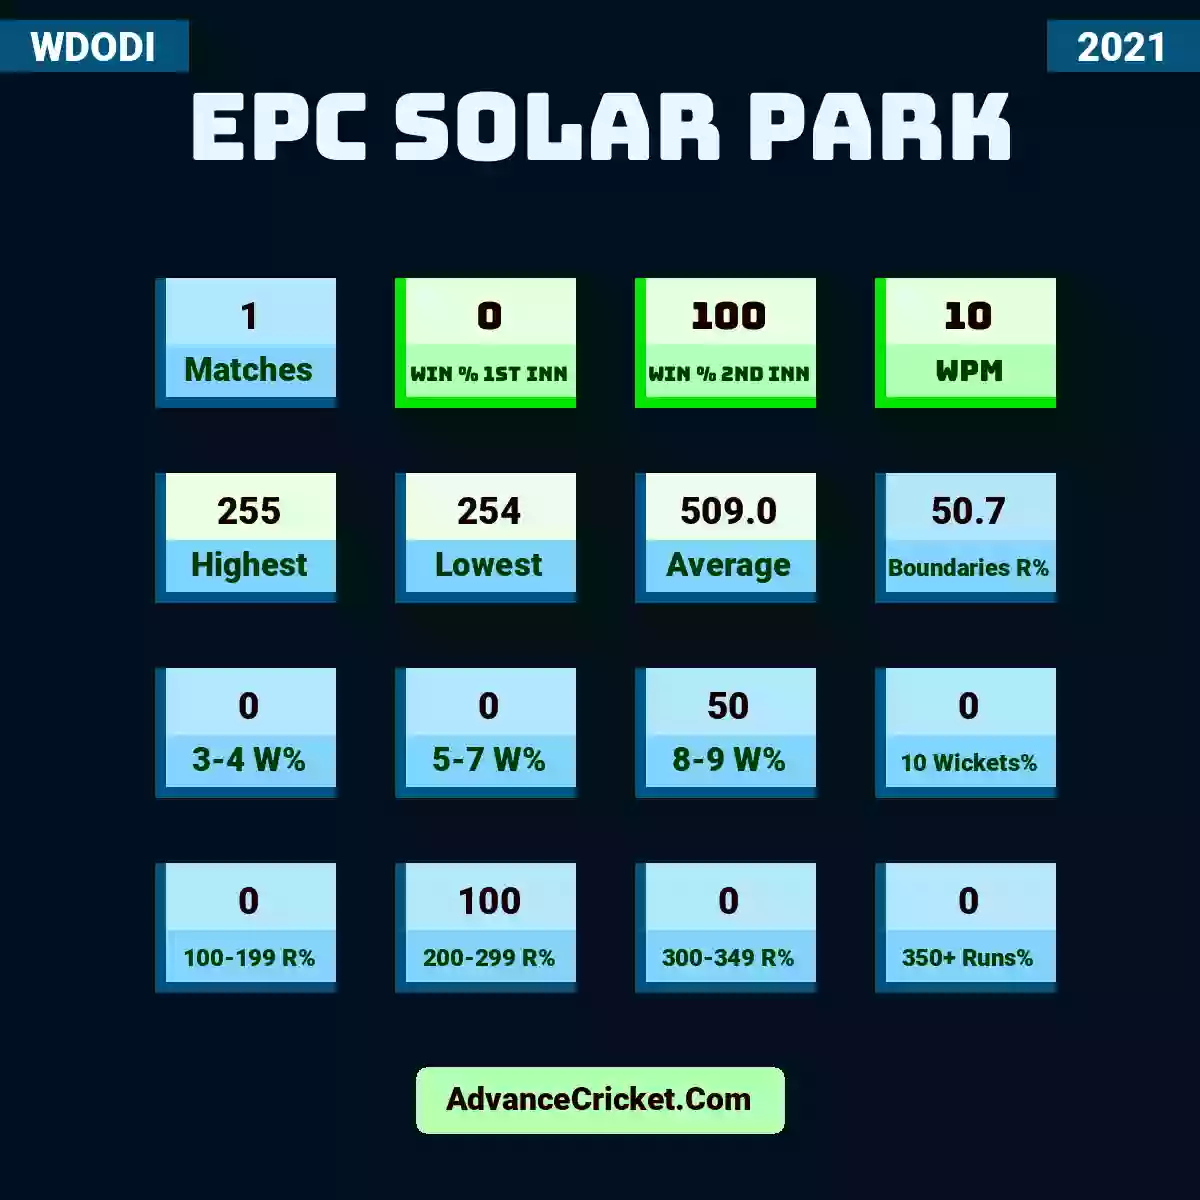 Image showing EPC Solar Park with Matches: 1, Win % 1st Inn: 0, Win % 2nd Inn: 100, WPM: 10, Highest: 255, Lowest: 254, Average: 509.0, Boundaries R%: 50.7, 3-4 W%: 0, 5-7 W%: 0, 8-9 W%: 50, 10 Wickets%: 0, 100-199 R%: 0, 200-299 R%: 100, 300-349 R%: 0, 350+ Runs%: 0.